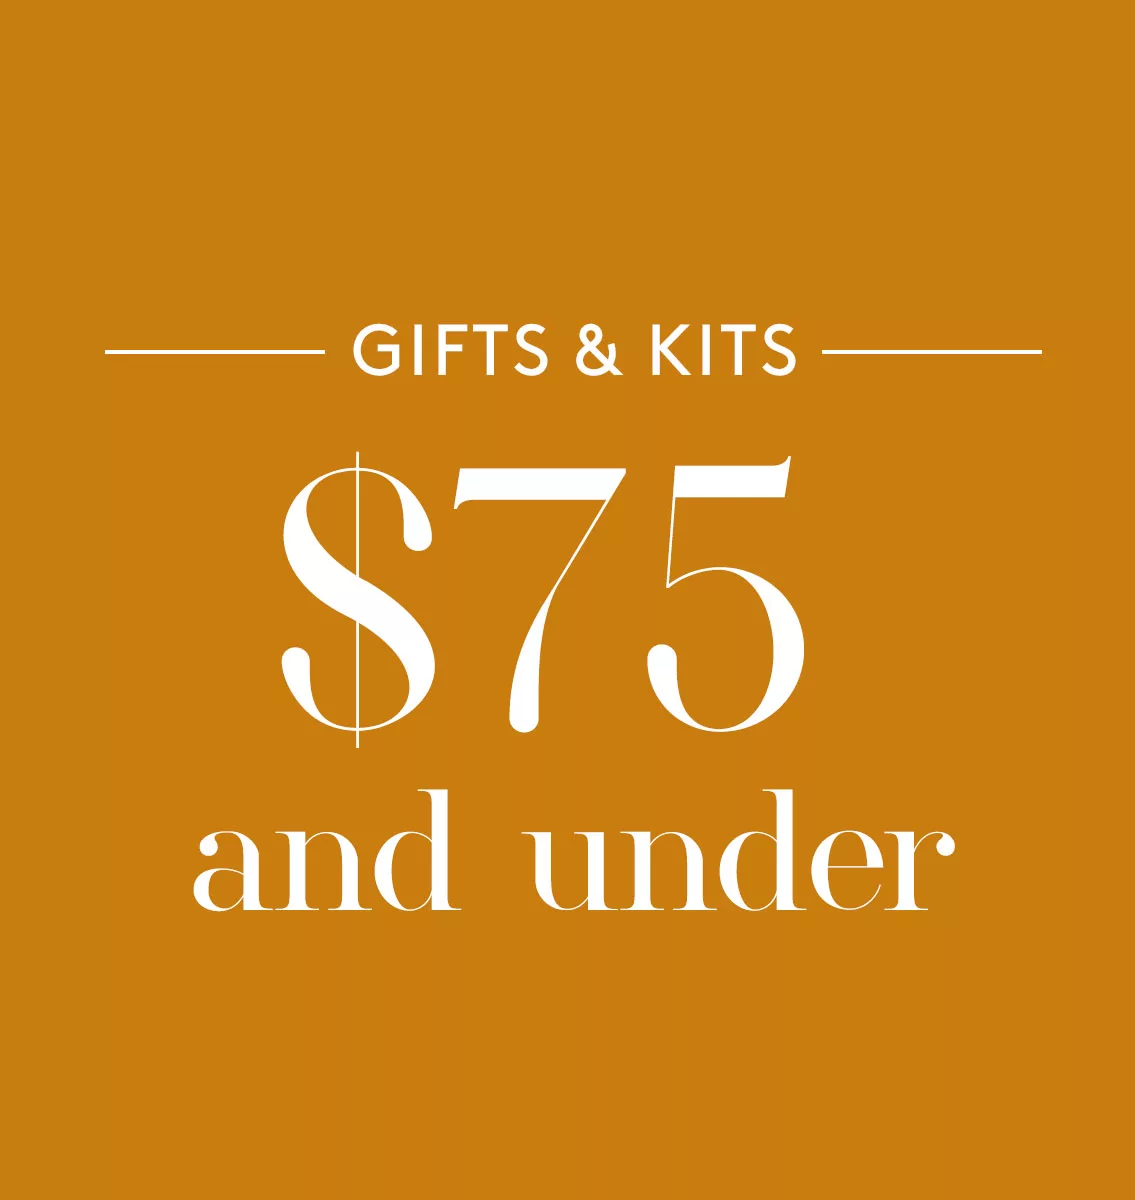 Gifts for $75 and under